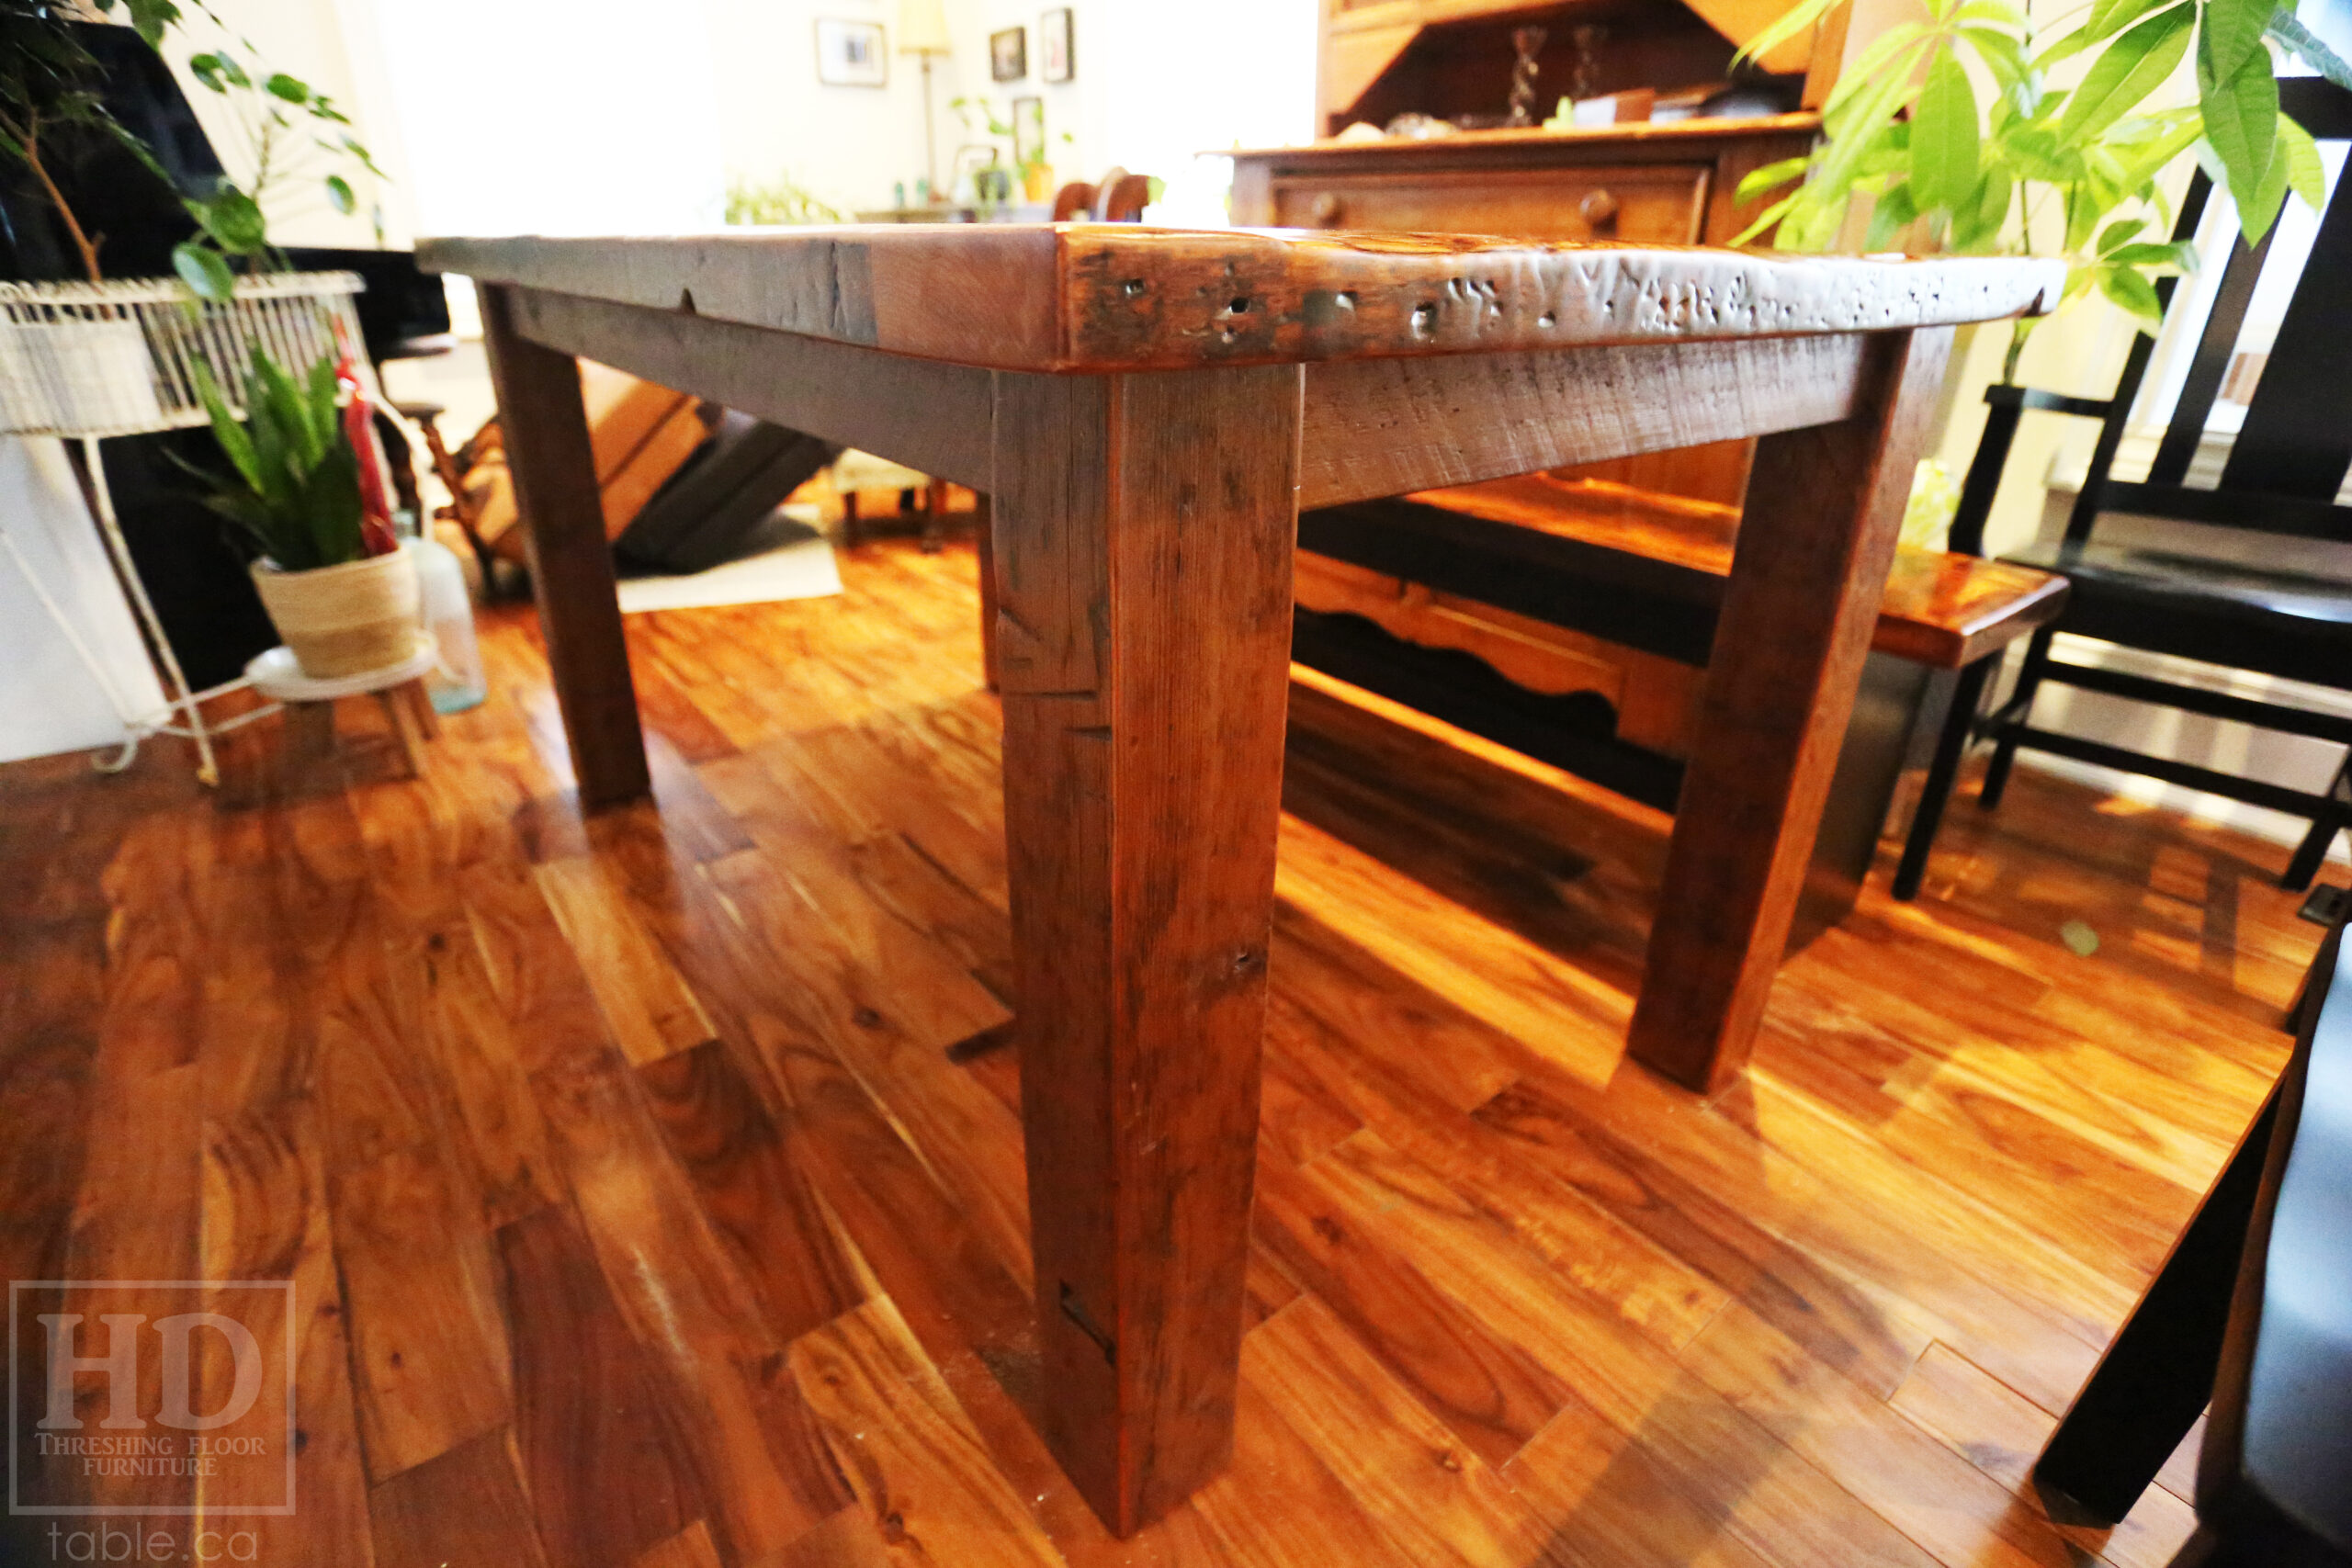 Old Growth Pine Reclaimed [Ontario] Barnwood Table we made for a Mississauga home - 5' length - 42" wide - Harvest Base: Straight 4"x4" [Windbrace] Beam Legs - Pine Threshing Floor Construction - Original edges & distressing maintained - Premium epoxy + satin polyurethane finish - 5' [matching] Plank Base Bench - 4 [Modified Plank Back] Chairs / Wormy Maple / Painted Black / Polyurethane clearcoat finish - www.table.ca